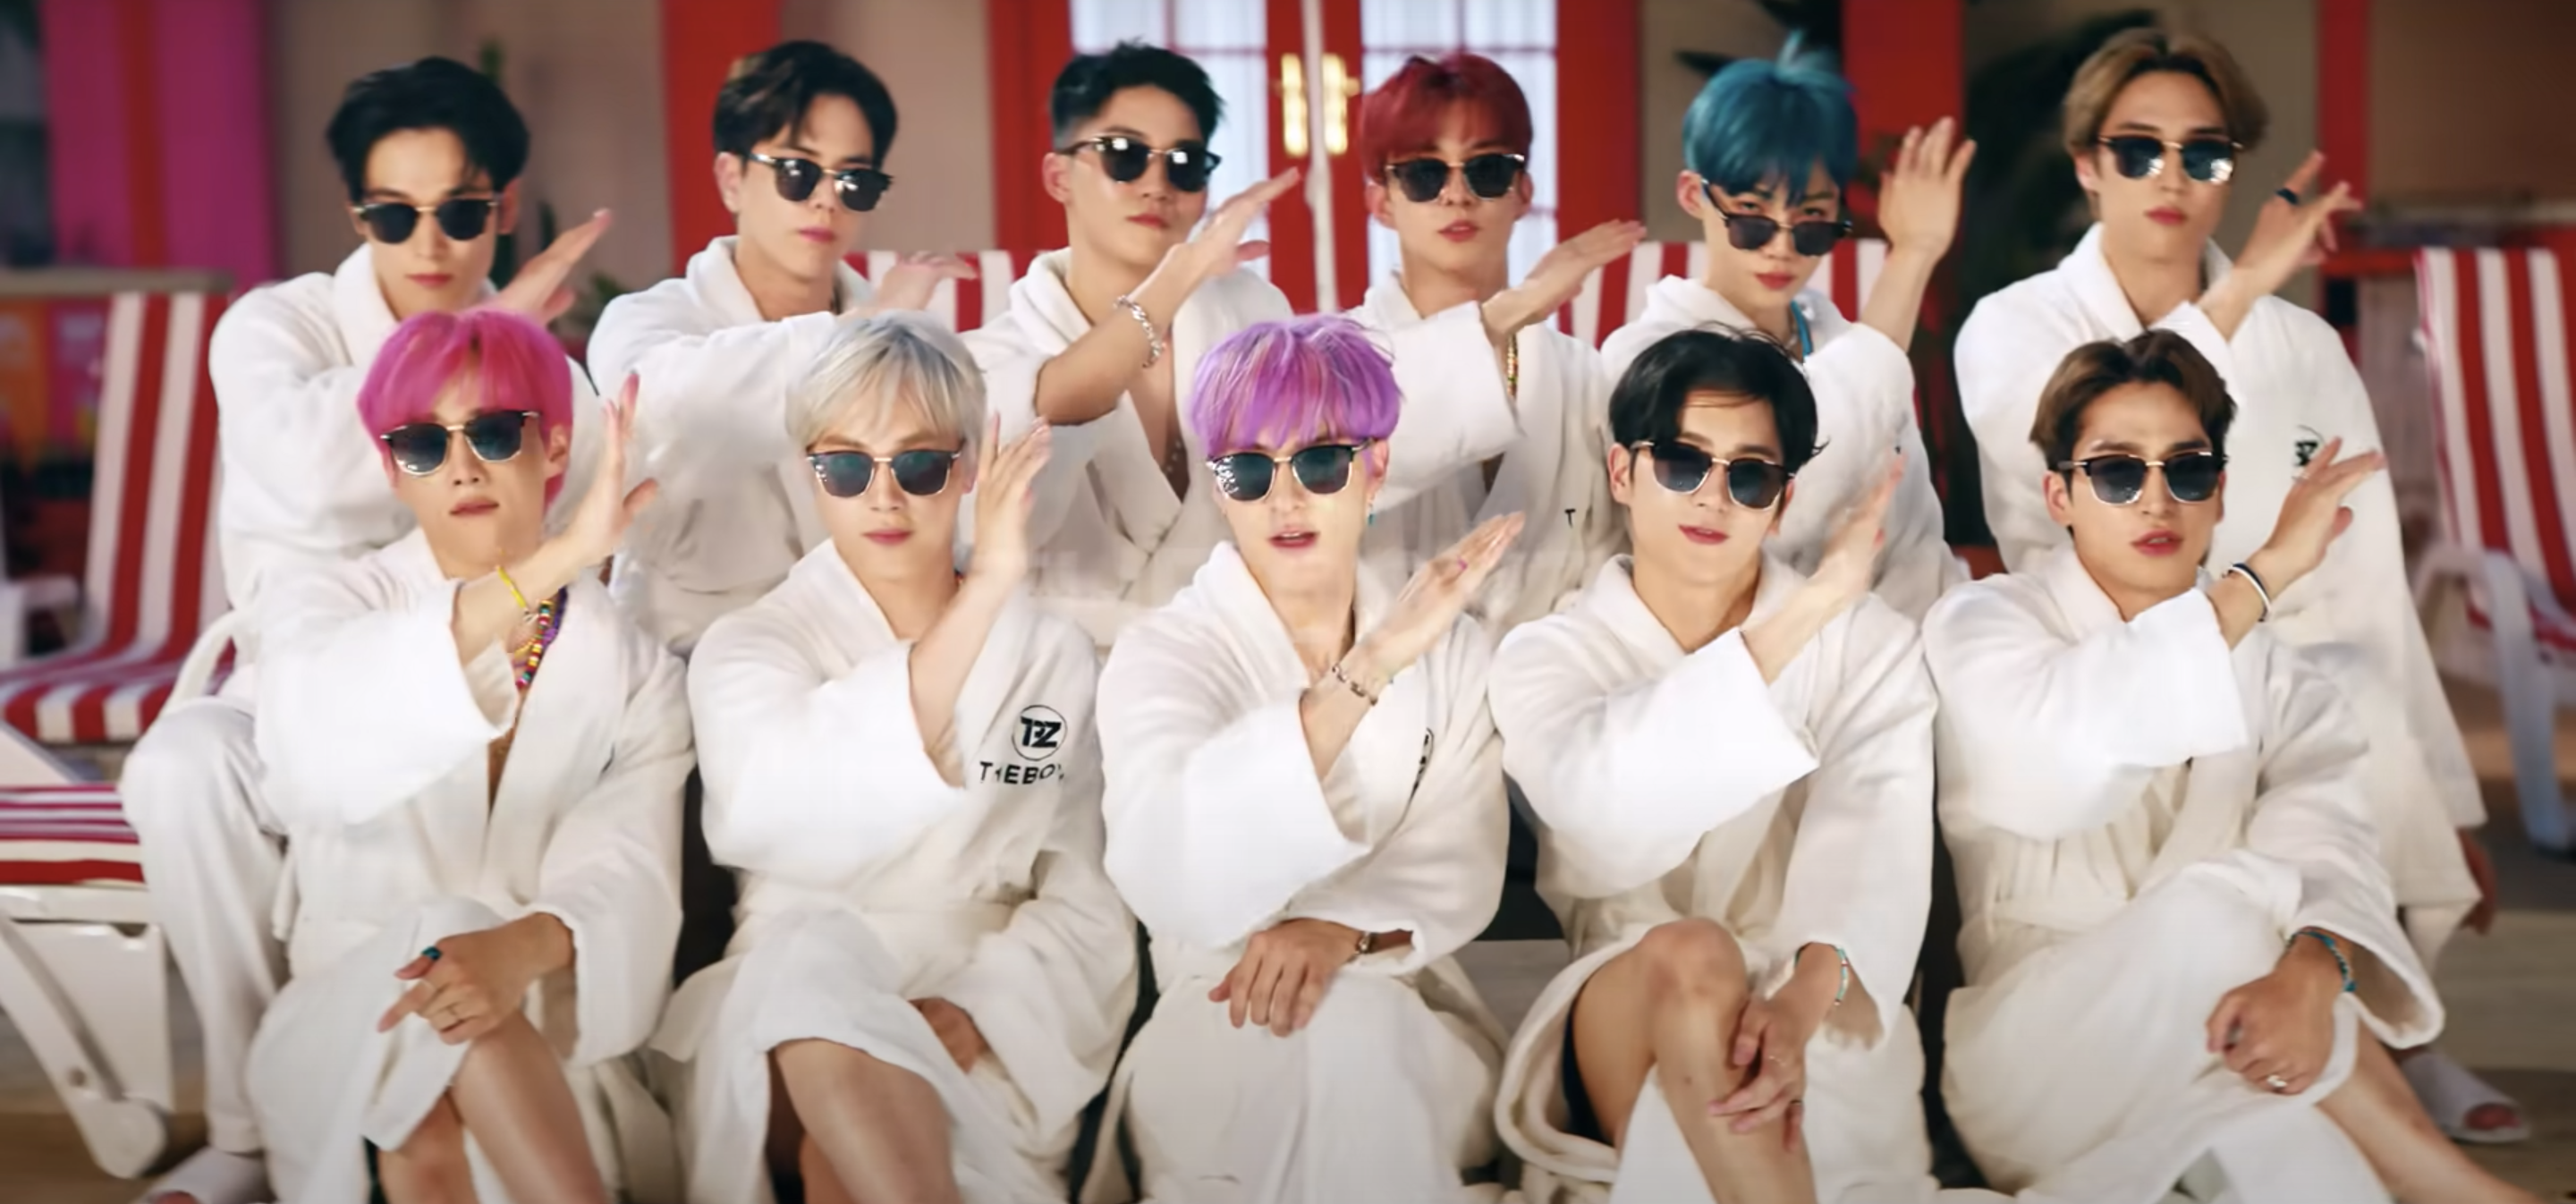 The Boyz wear matching robes during their &quot;Thrill Ride&quot; music video